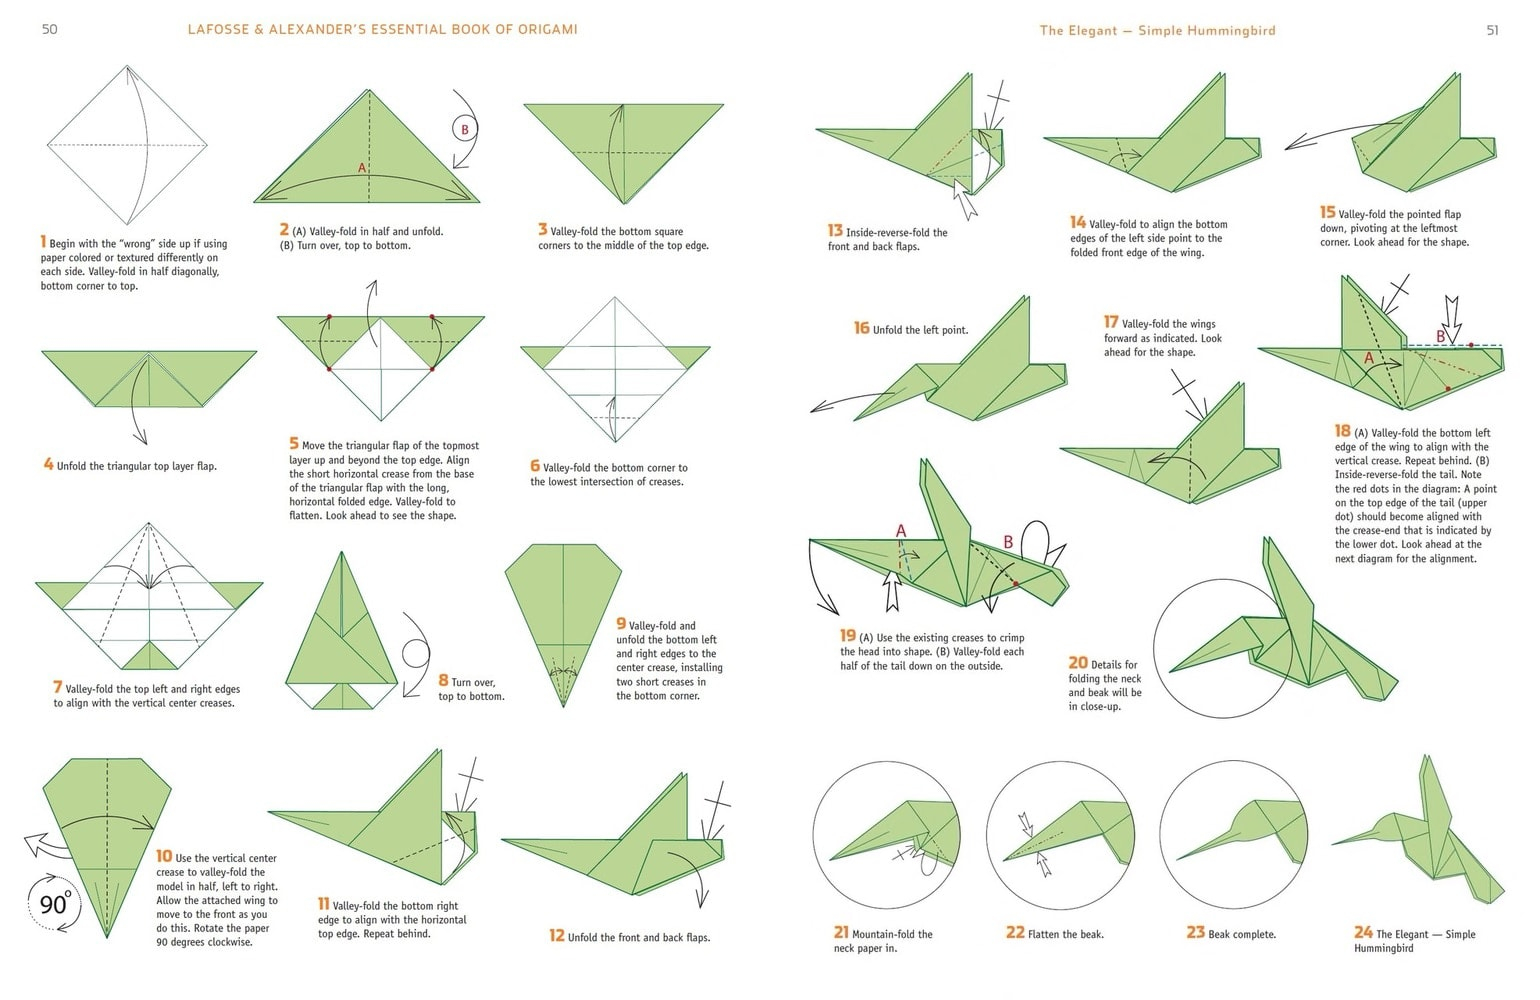 Origami Book Instructions My Review Of Lafosse Alexanders Essential Book Of Origami